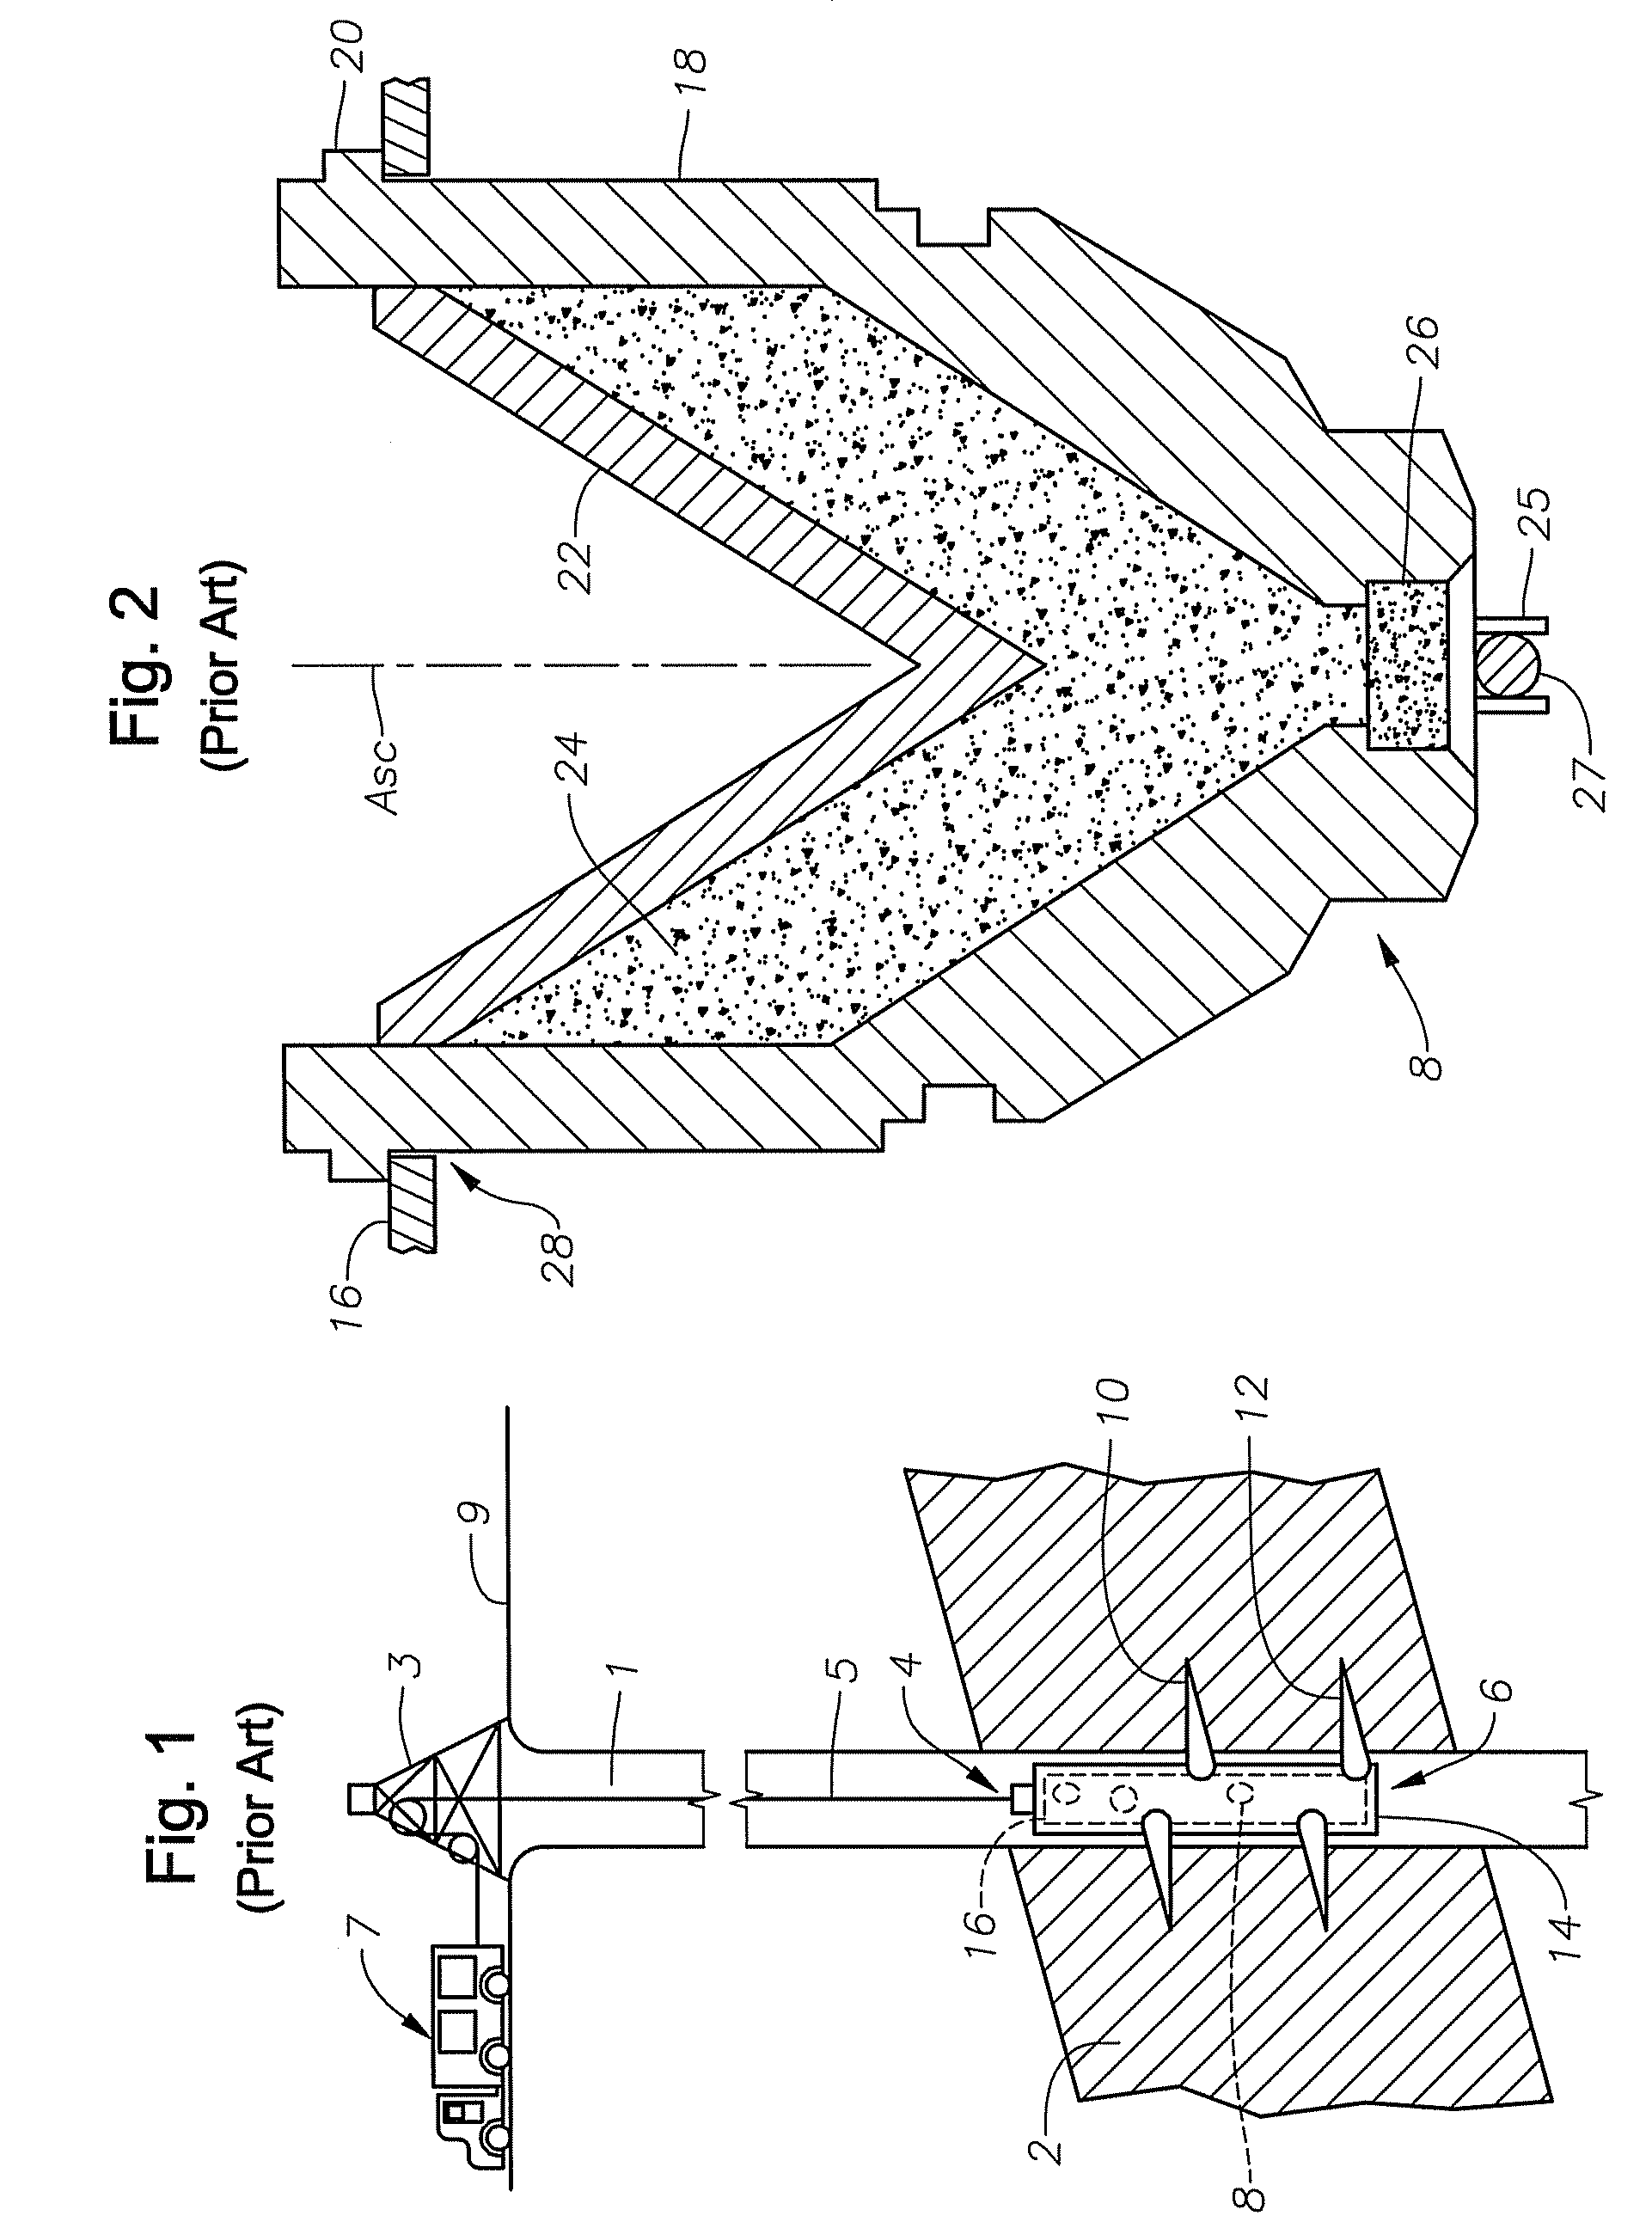 Perforating system with shaped charge case having a modified boss